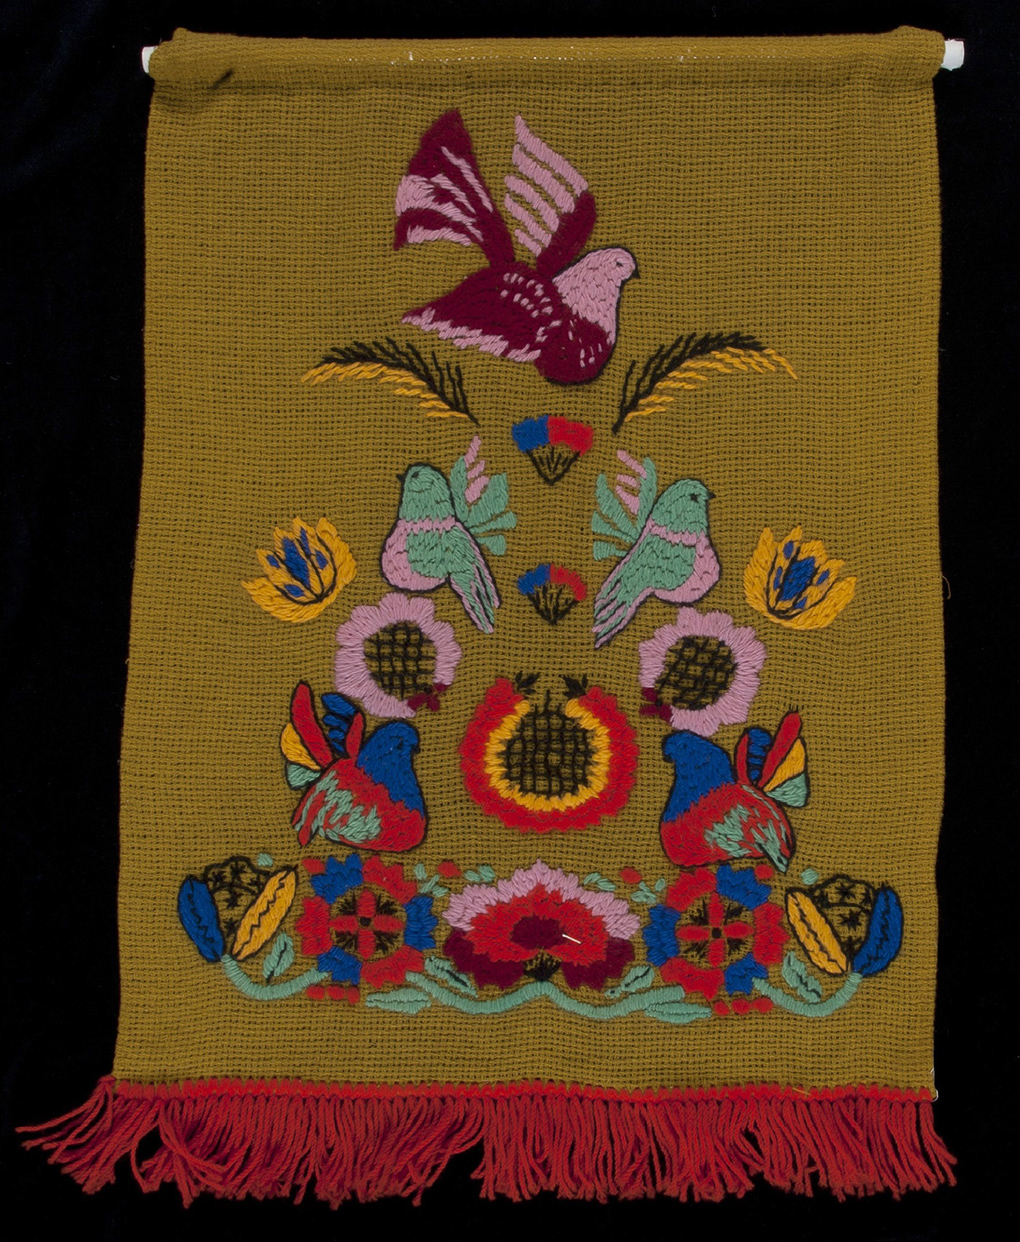 Wall hanging made by Magda Mihkelson, incorporating traditional Estonian motifs and Australian birds, 1960s. ANMM Collection 00053068.